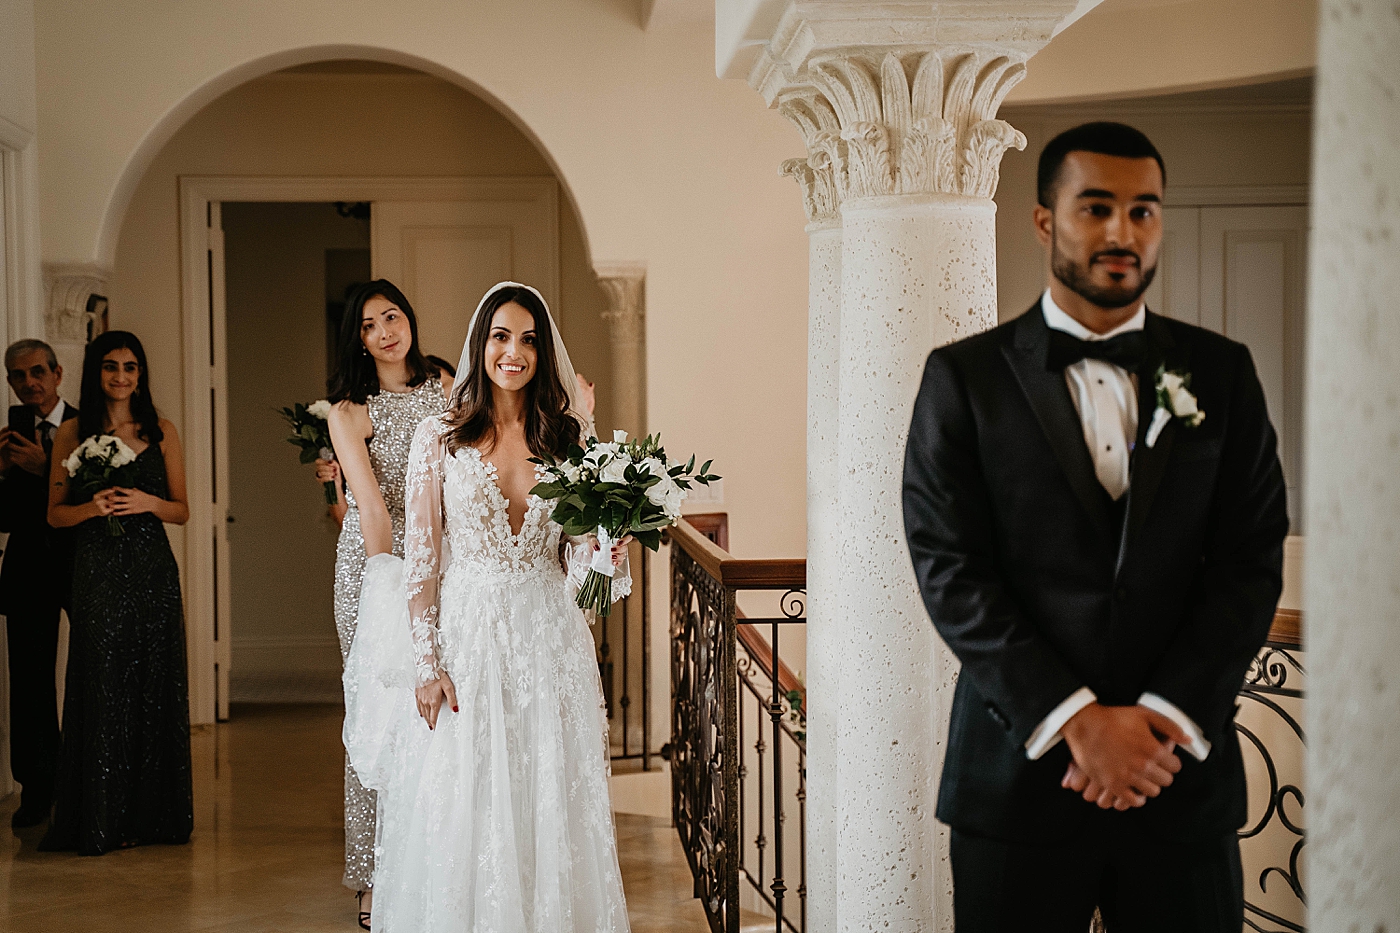 Groom with his back turned while Bride approaches for First Look Intimate Home Wedding captured by South Florida Wedding Photographer Krystal Capone Photography